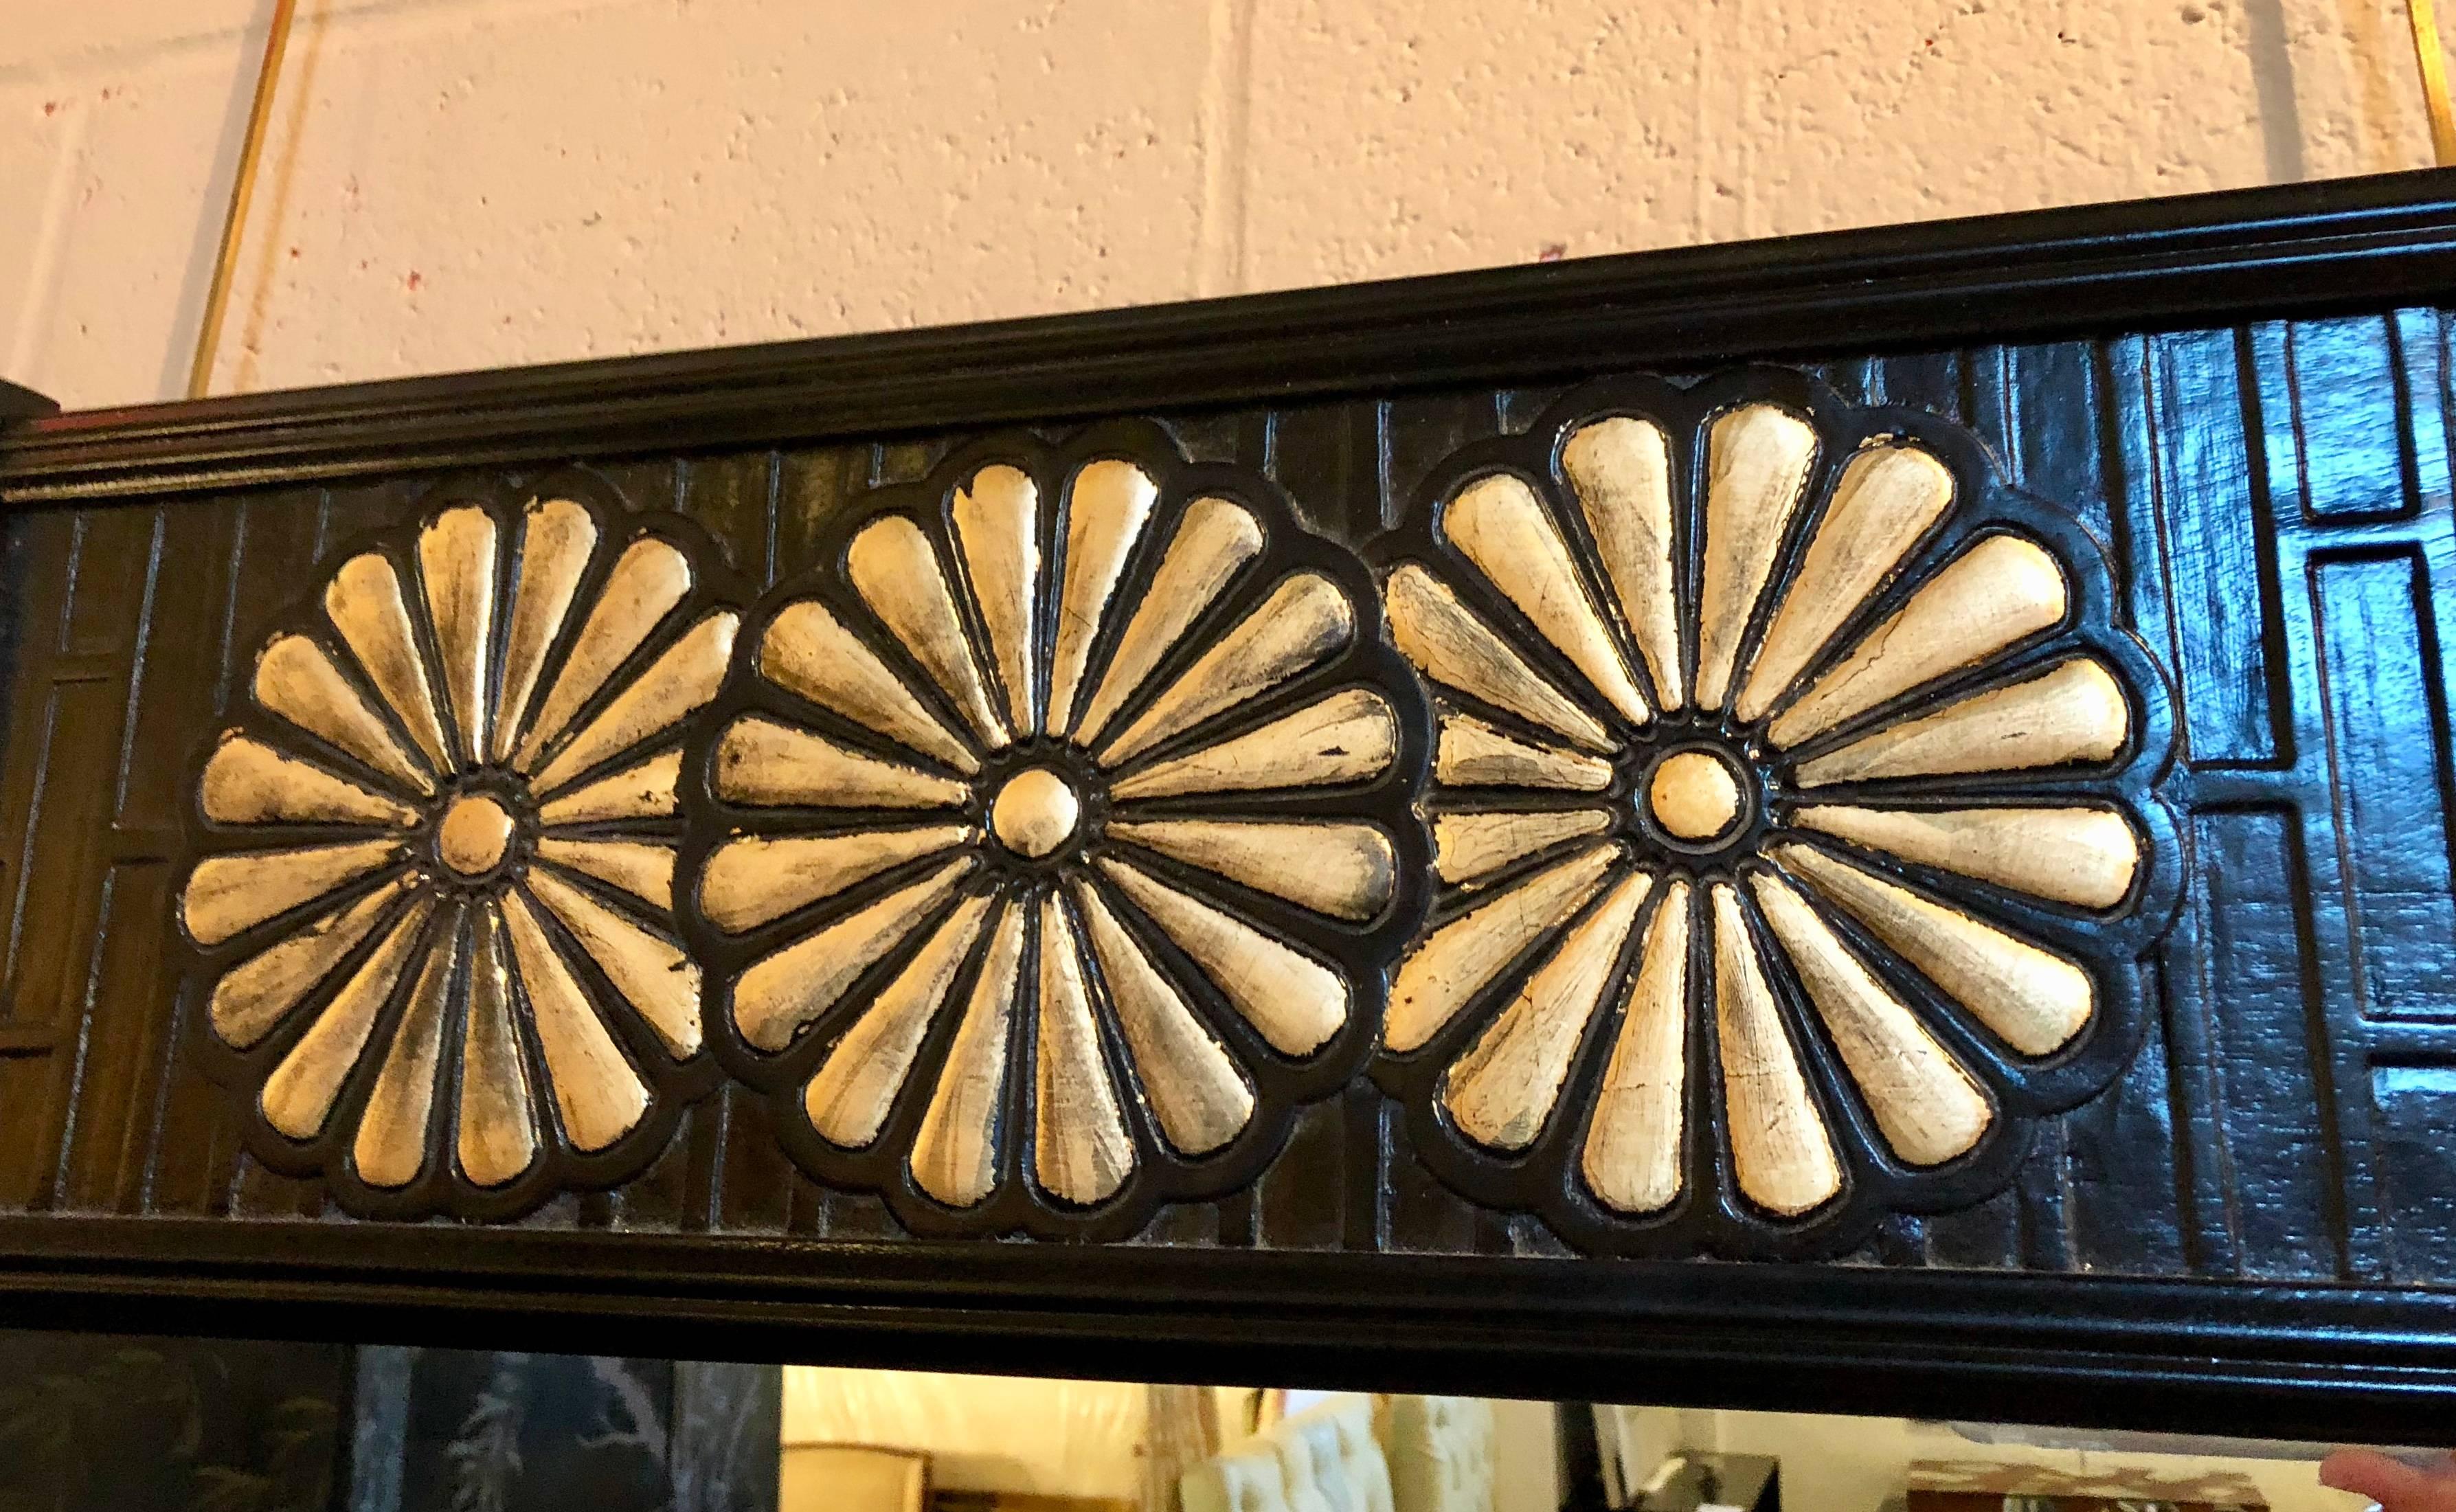 Pair of Hollywood Regency style American modern Regency style mirrors by John Widdcomb. Decorative gilt flowers on ebonized bamboo pattern frame. The centre mirror sitting in an ebony frame with column-form sides and an upper apron of brick